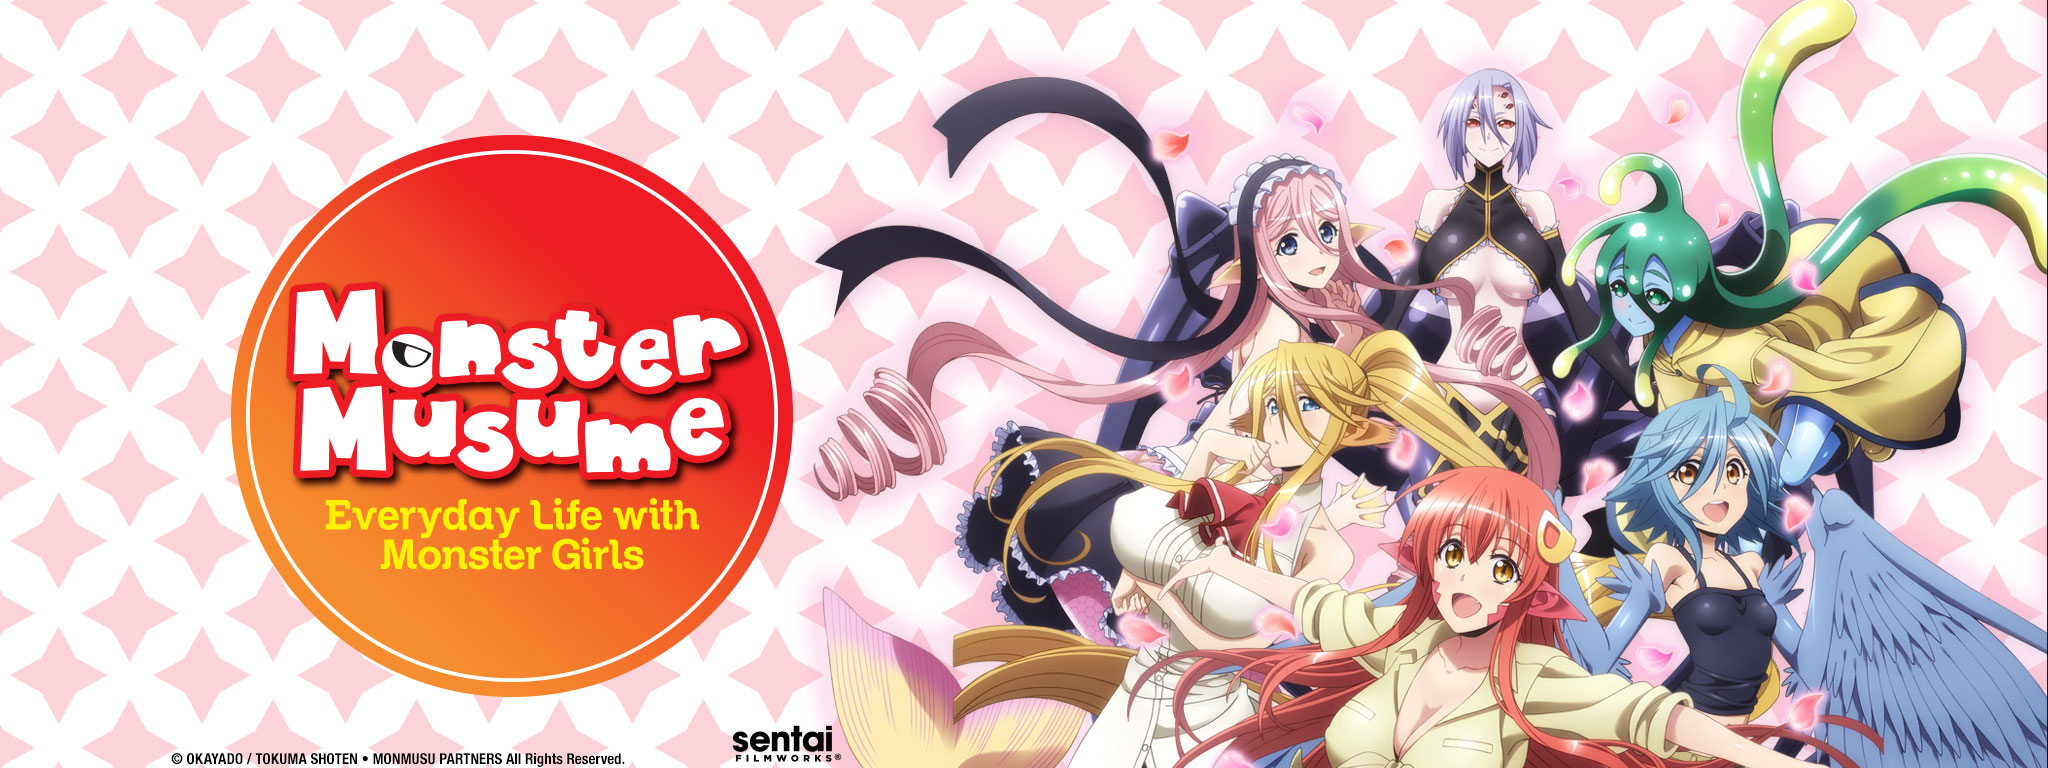 Title Art for MONSTER MUSUME Everyday Life with Monster Girls